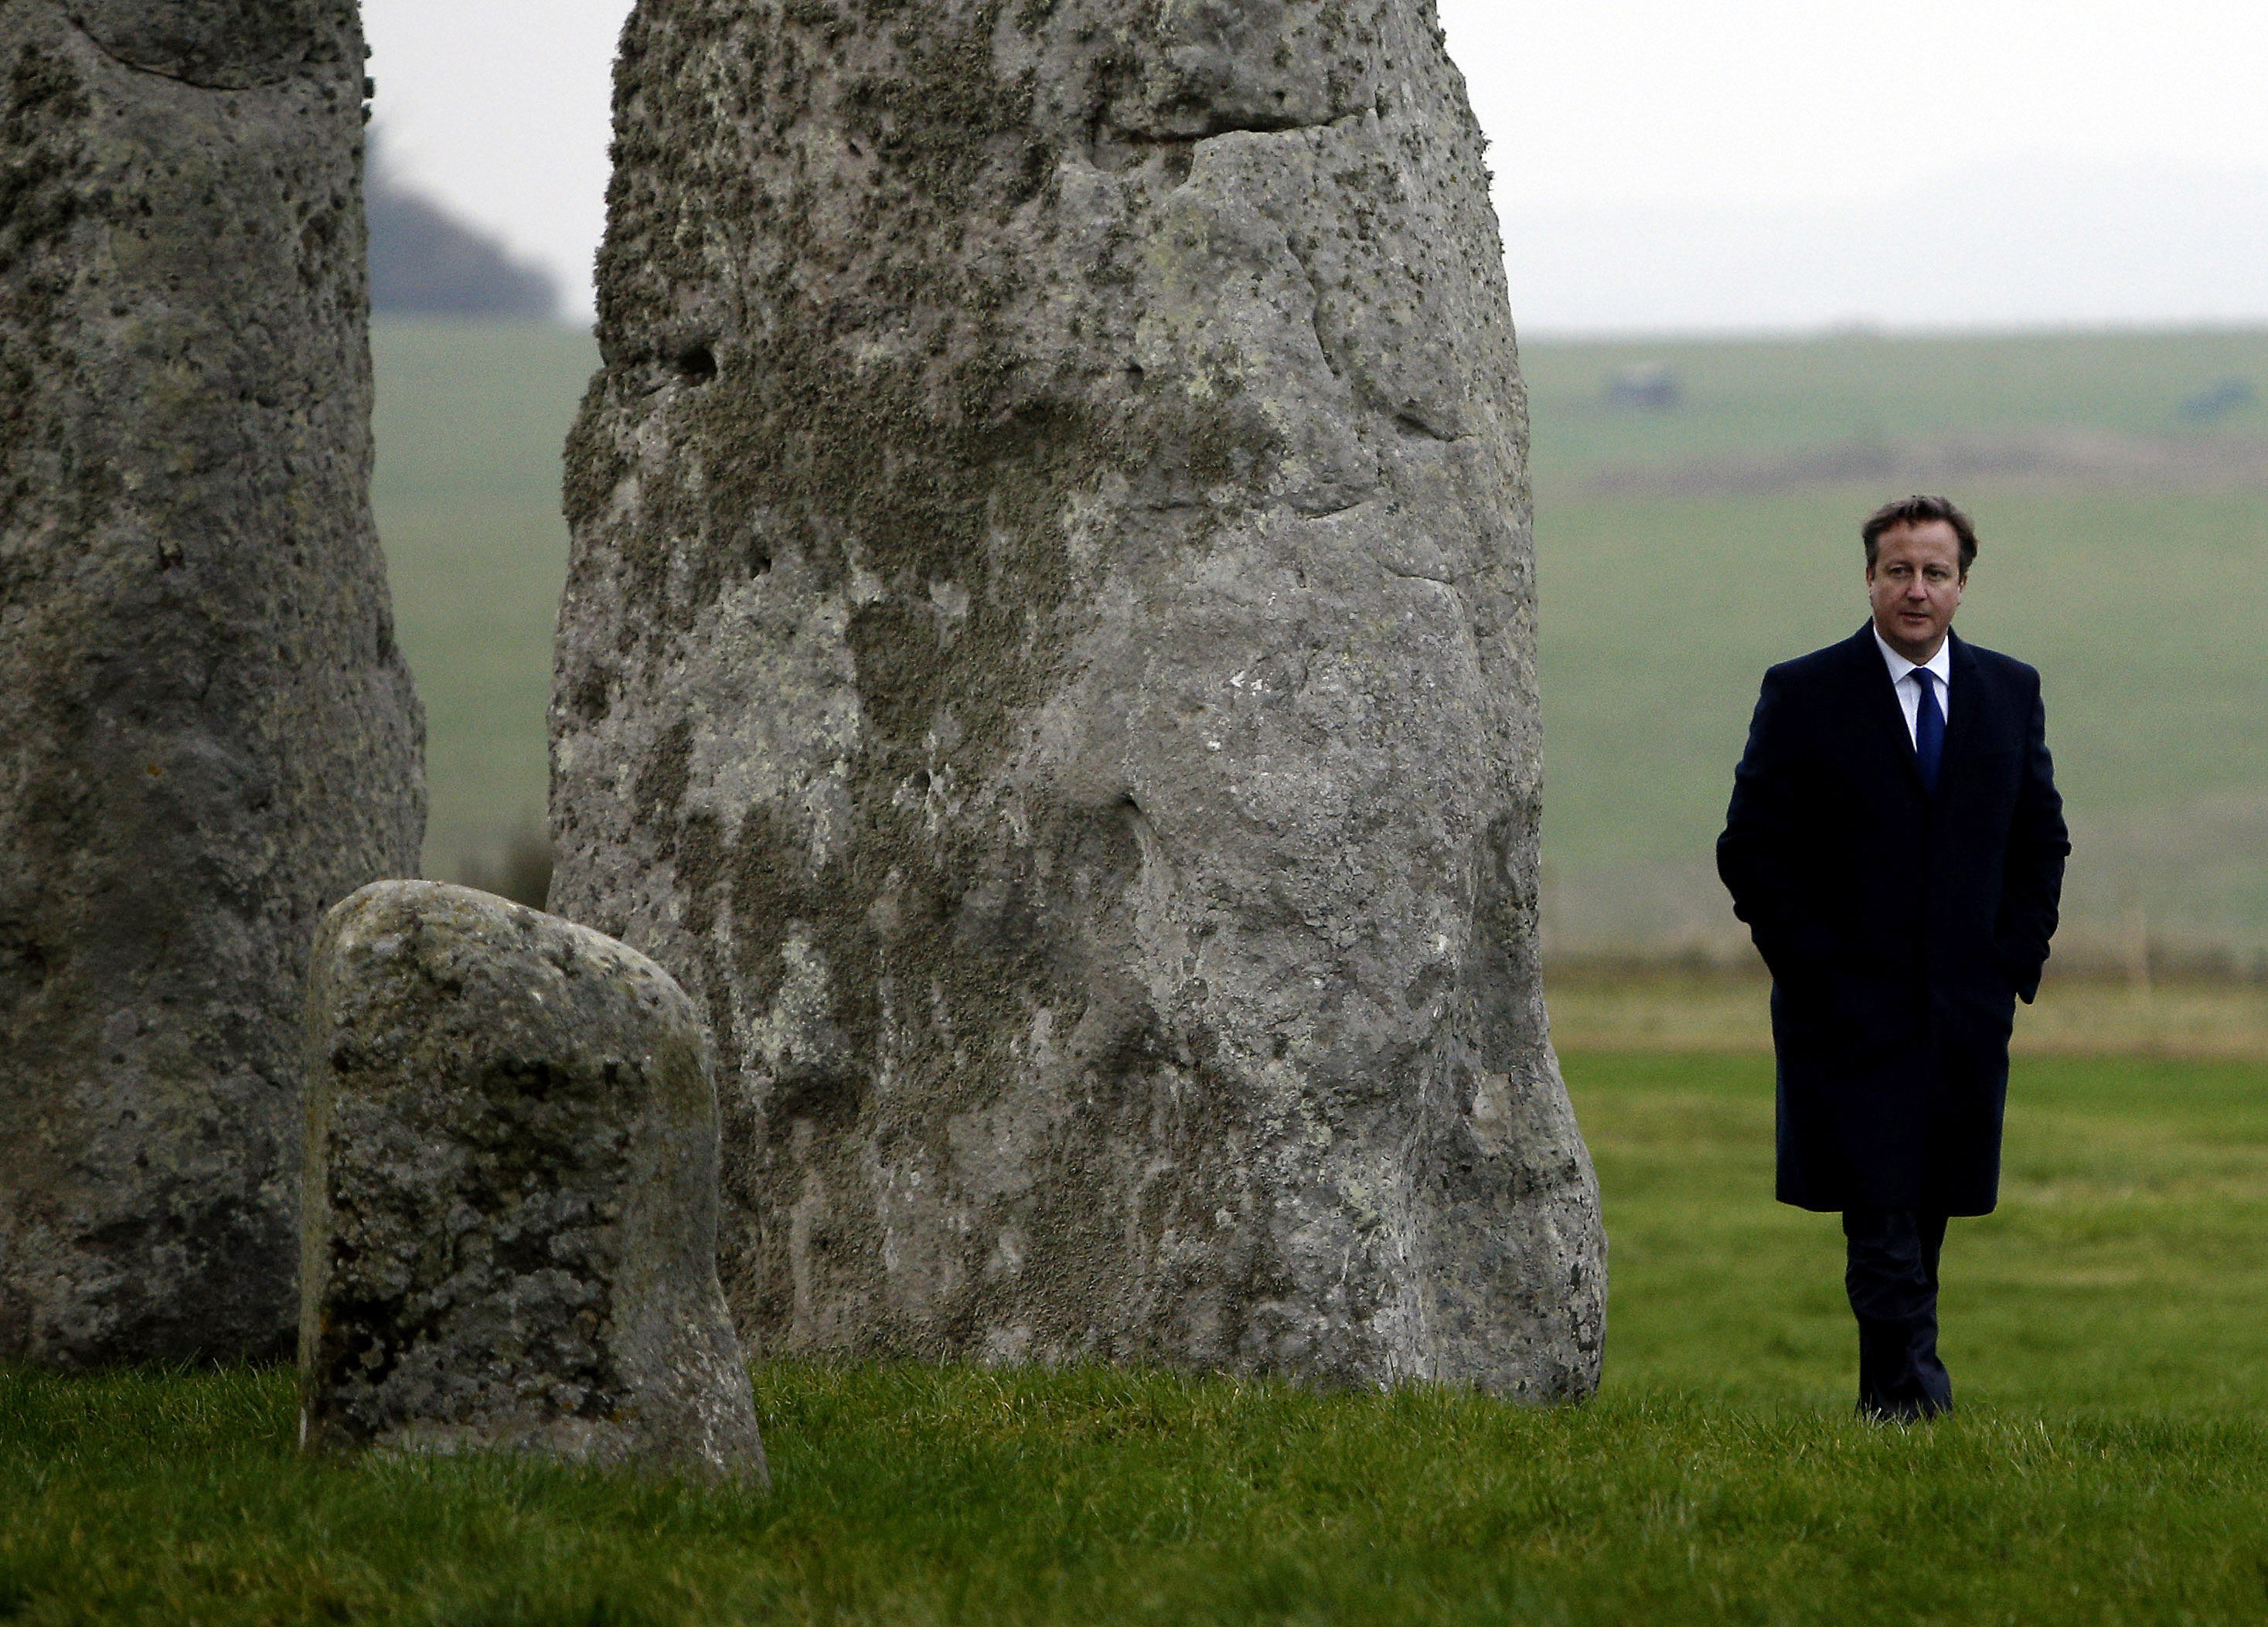 Then prime minister David Cameron visiting Stonehenge in 2014 